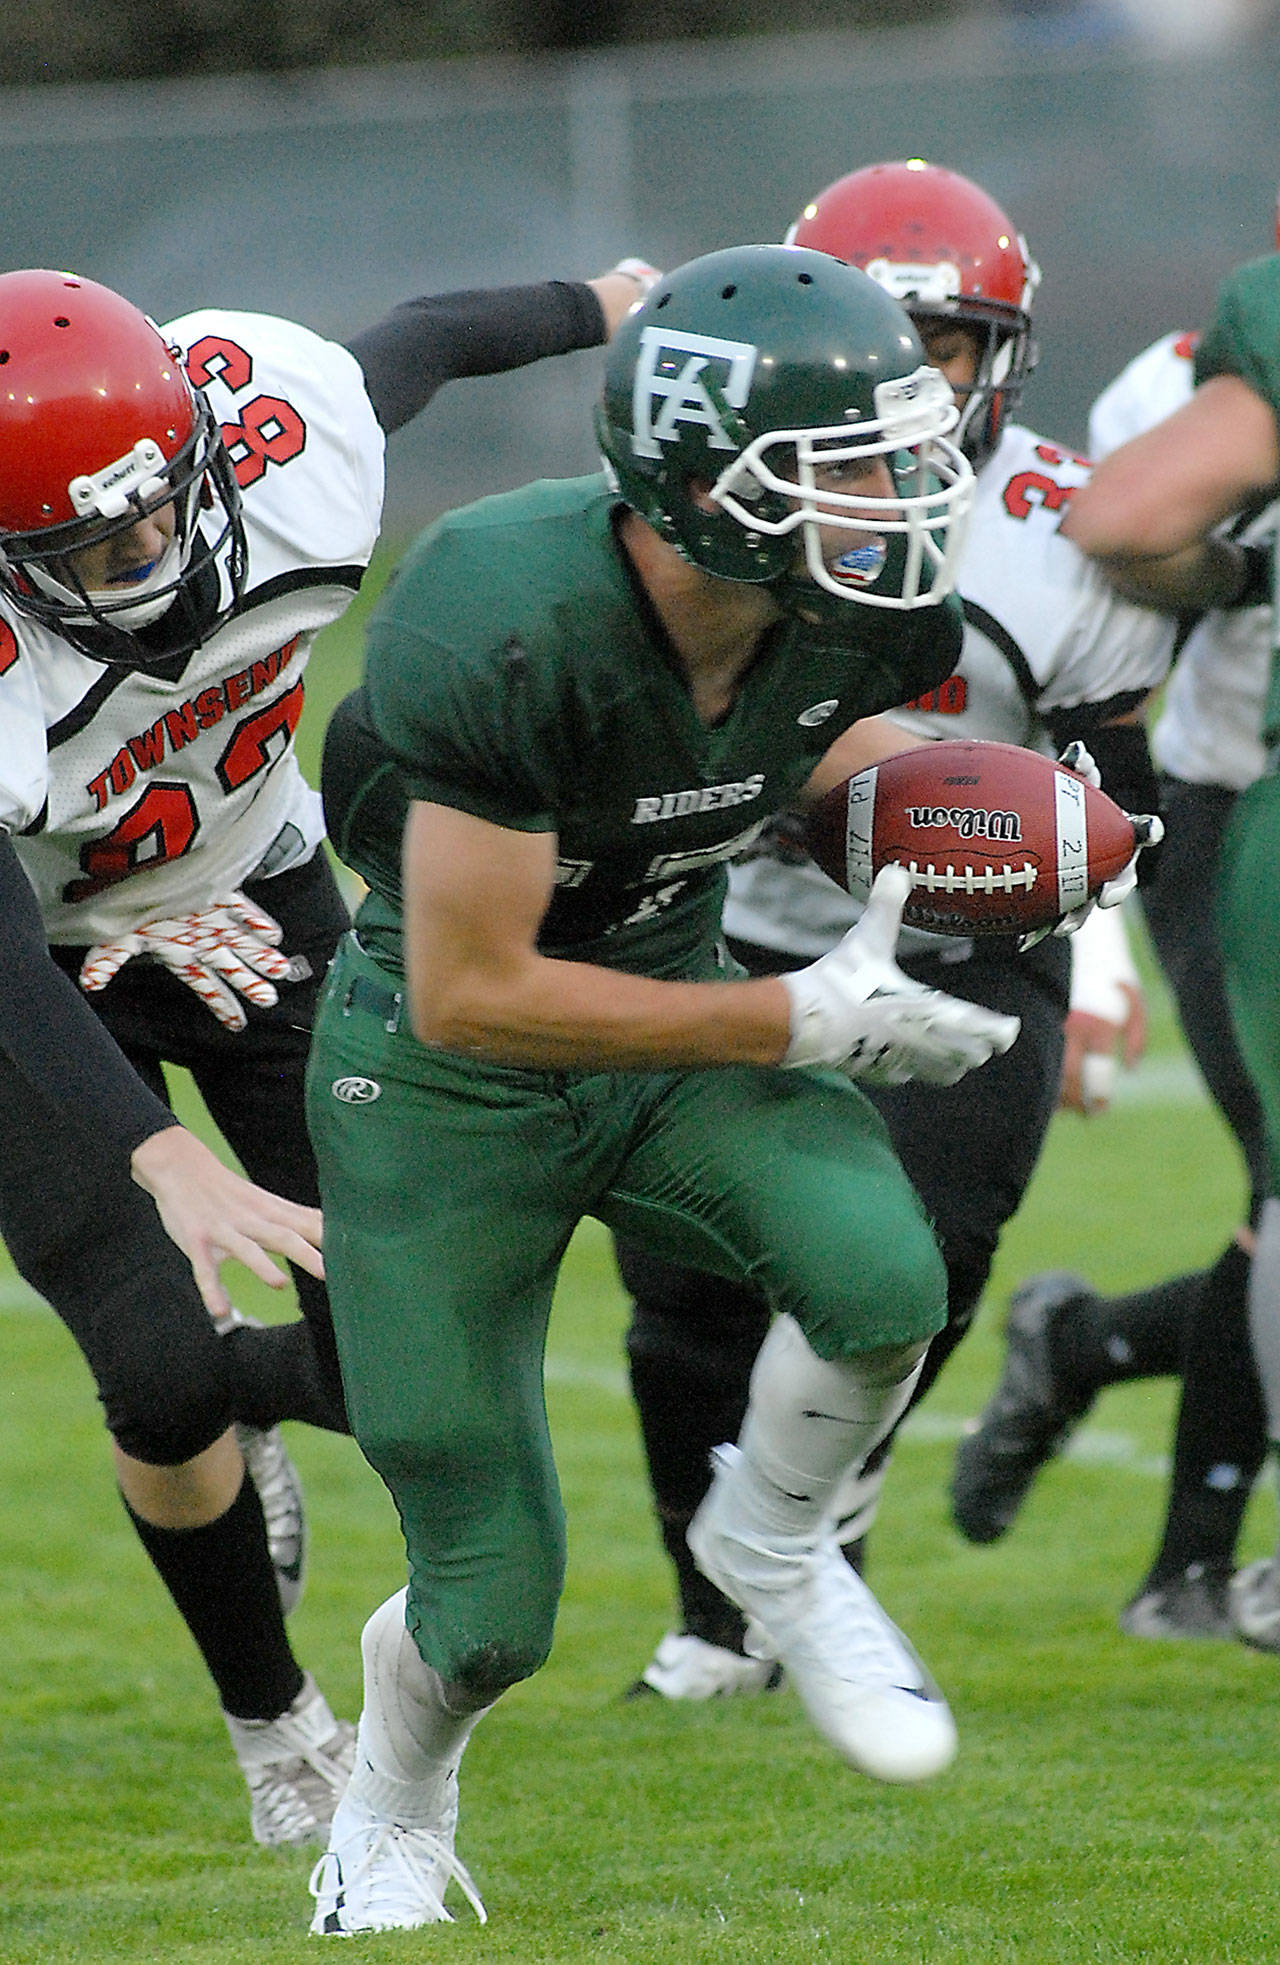 Port Angeles’ Garrett Edwards, center, carries the ball while avoiding the defense of Port Townsend’s Jaden Steinfort, left, and Jacob Boucher, rear, during the first quarter on Friday at Port Angeles Civic Field.                                Keith Thorpe/Peninsula Daily News